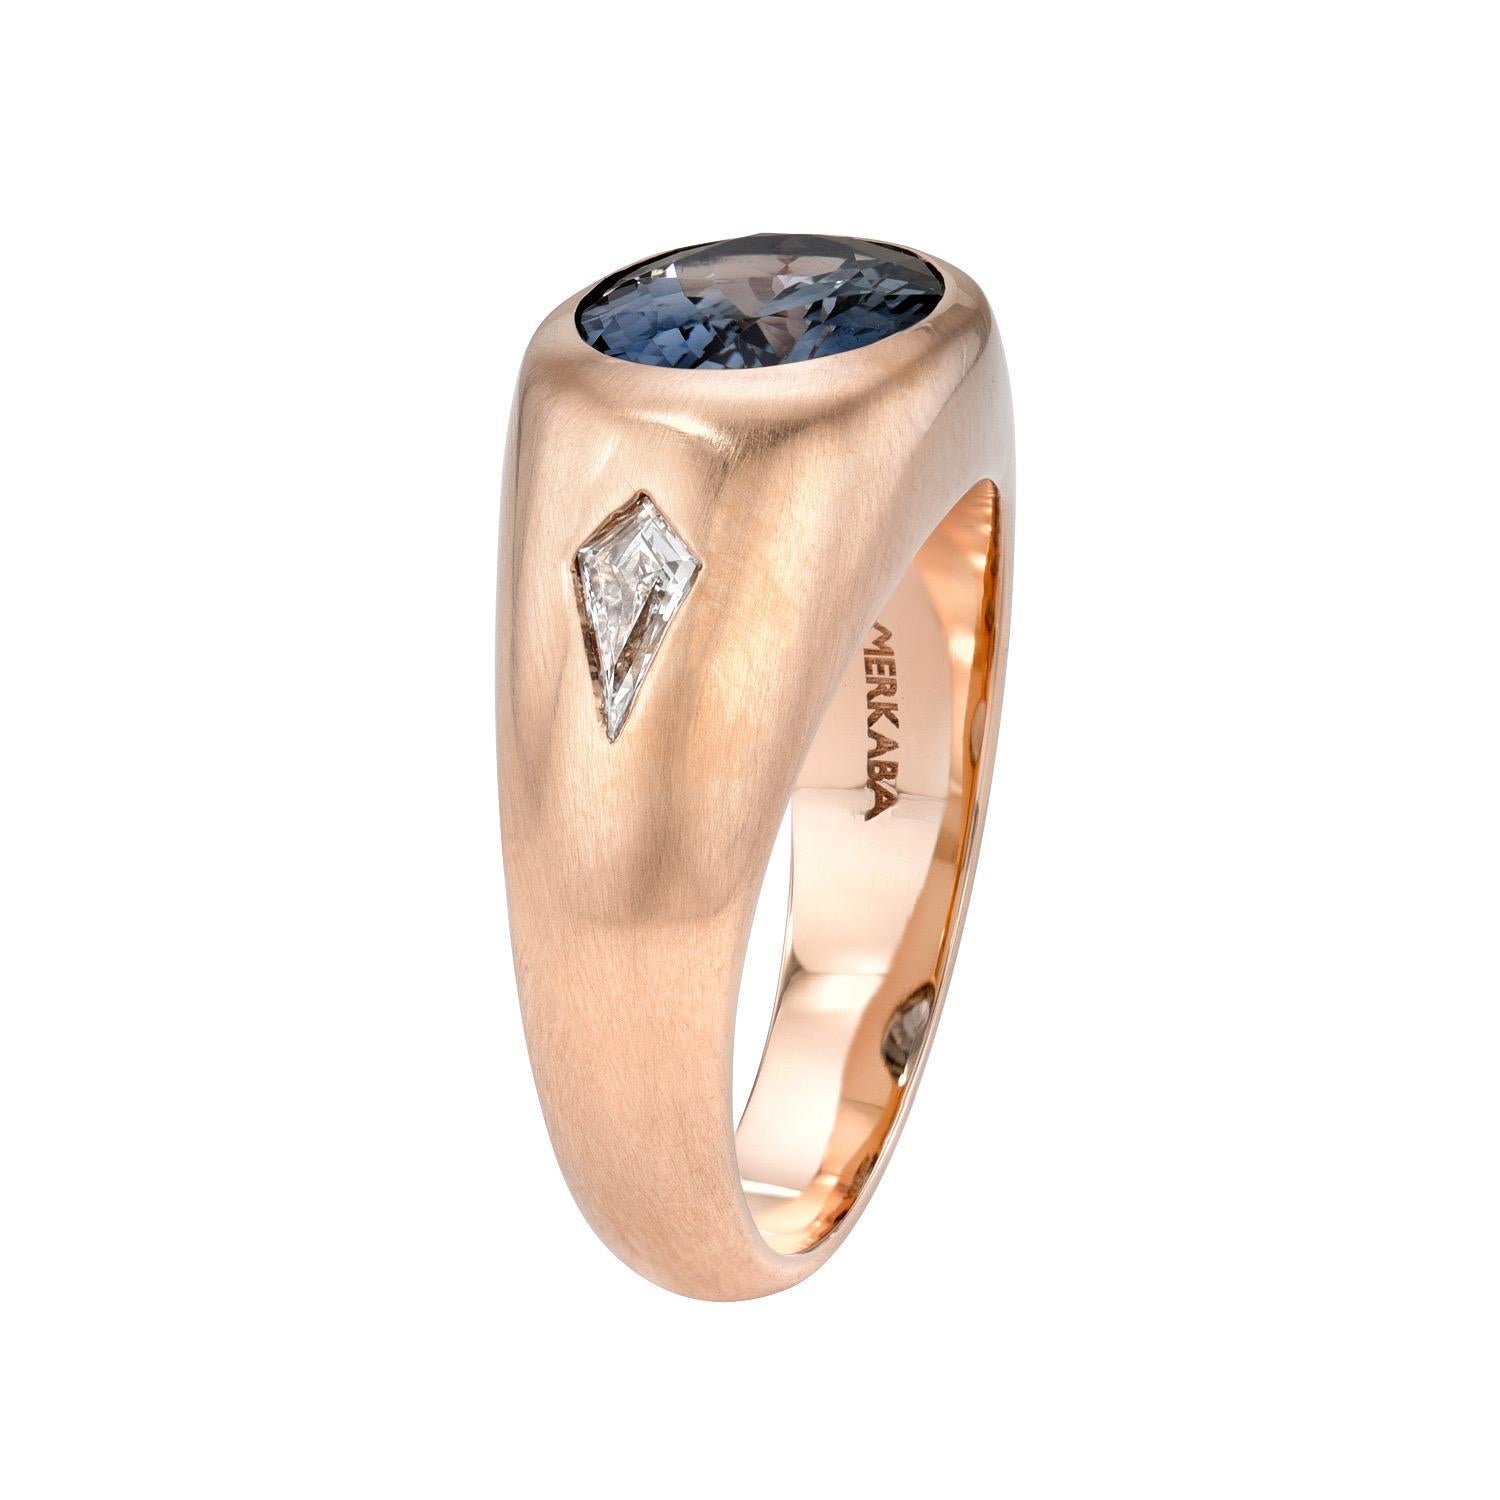 18K rose gold unisex ring set with a rare and remarkable 5.20 carat Grey-Blue oval Spinel, and a pair of E/VS1 Kite diamonds weighing a total of 0.32 carats. Matte brushed finish.
Ring size 10.5. Resizing is complementary upon request.
Crafted by